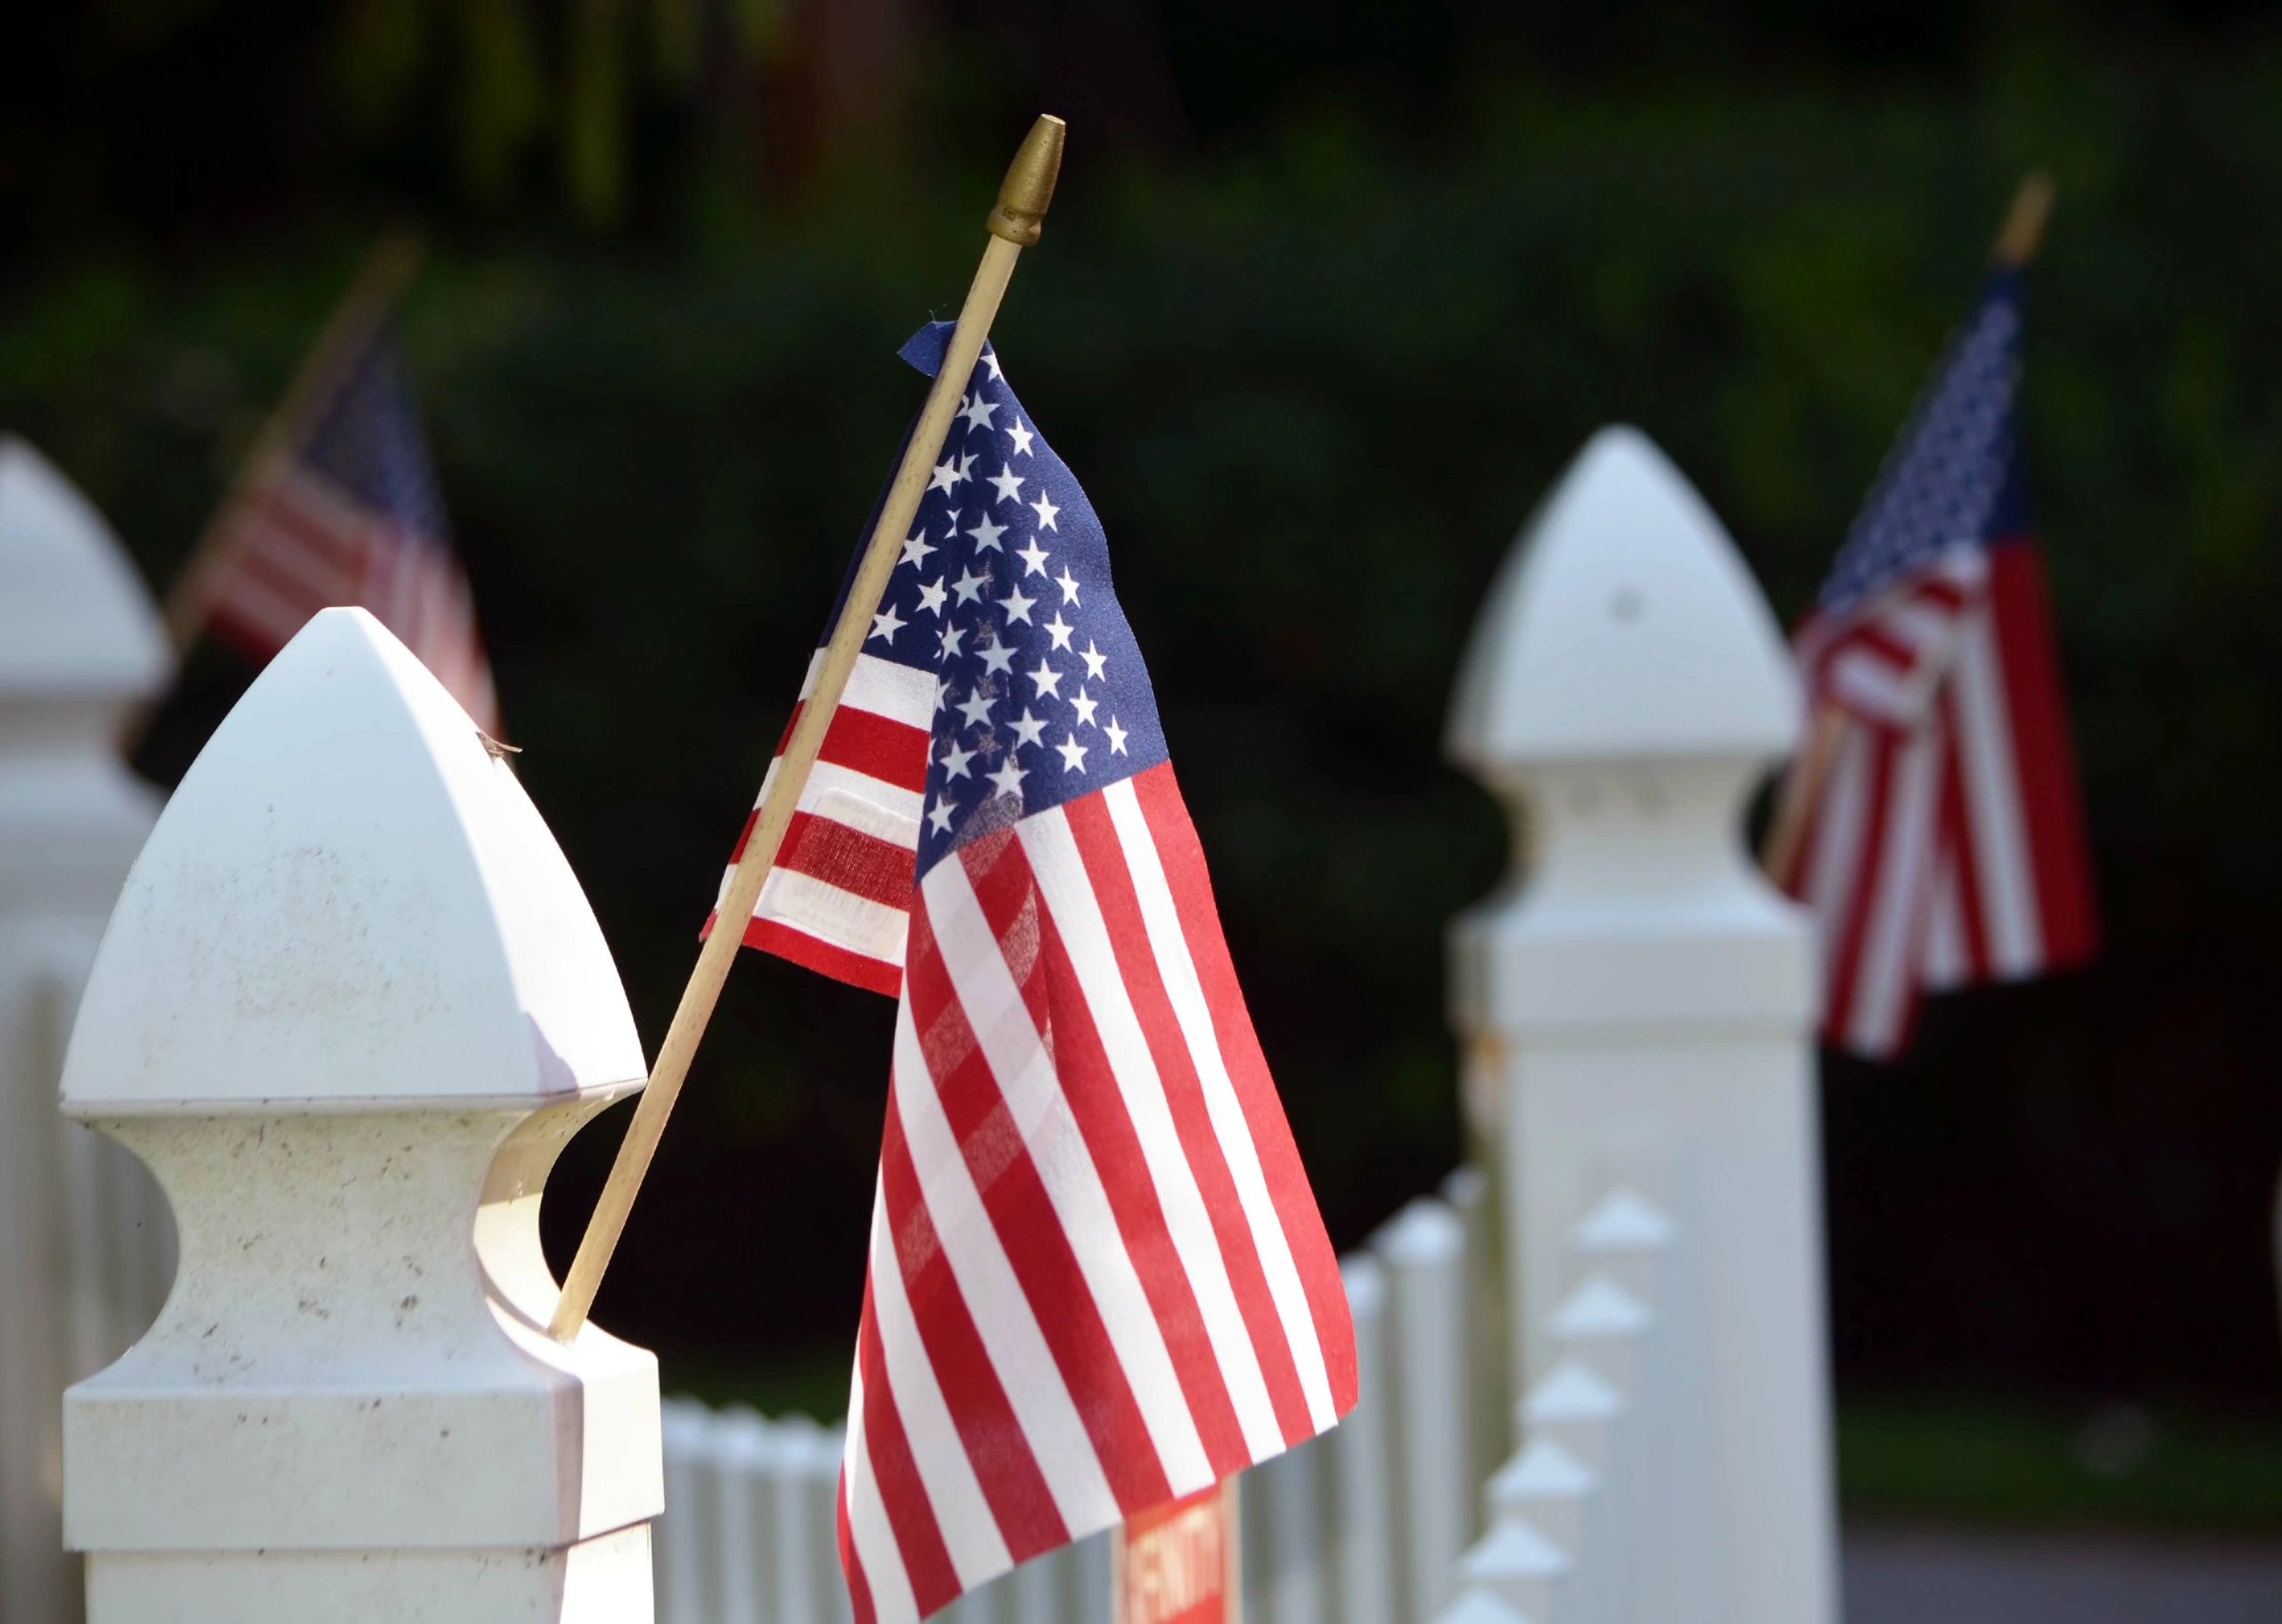 Up close picture of a white fence post with an American flag attached.